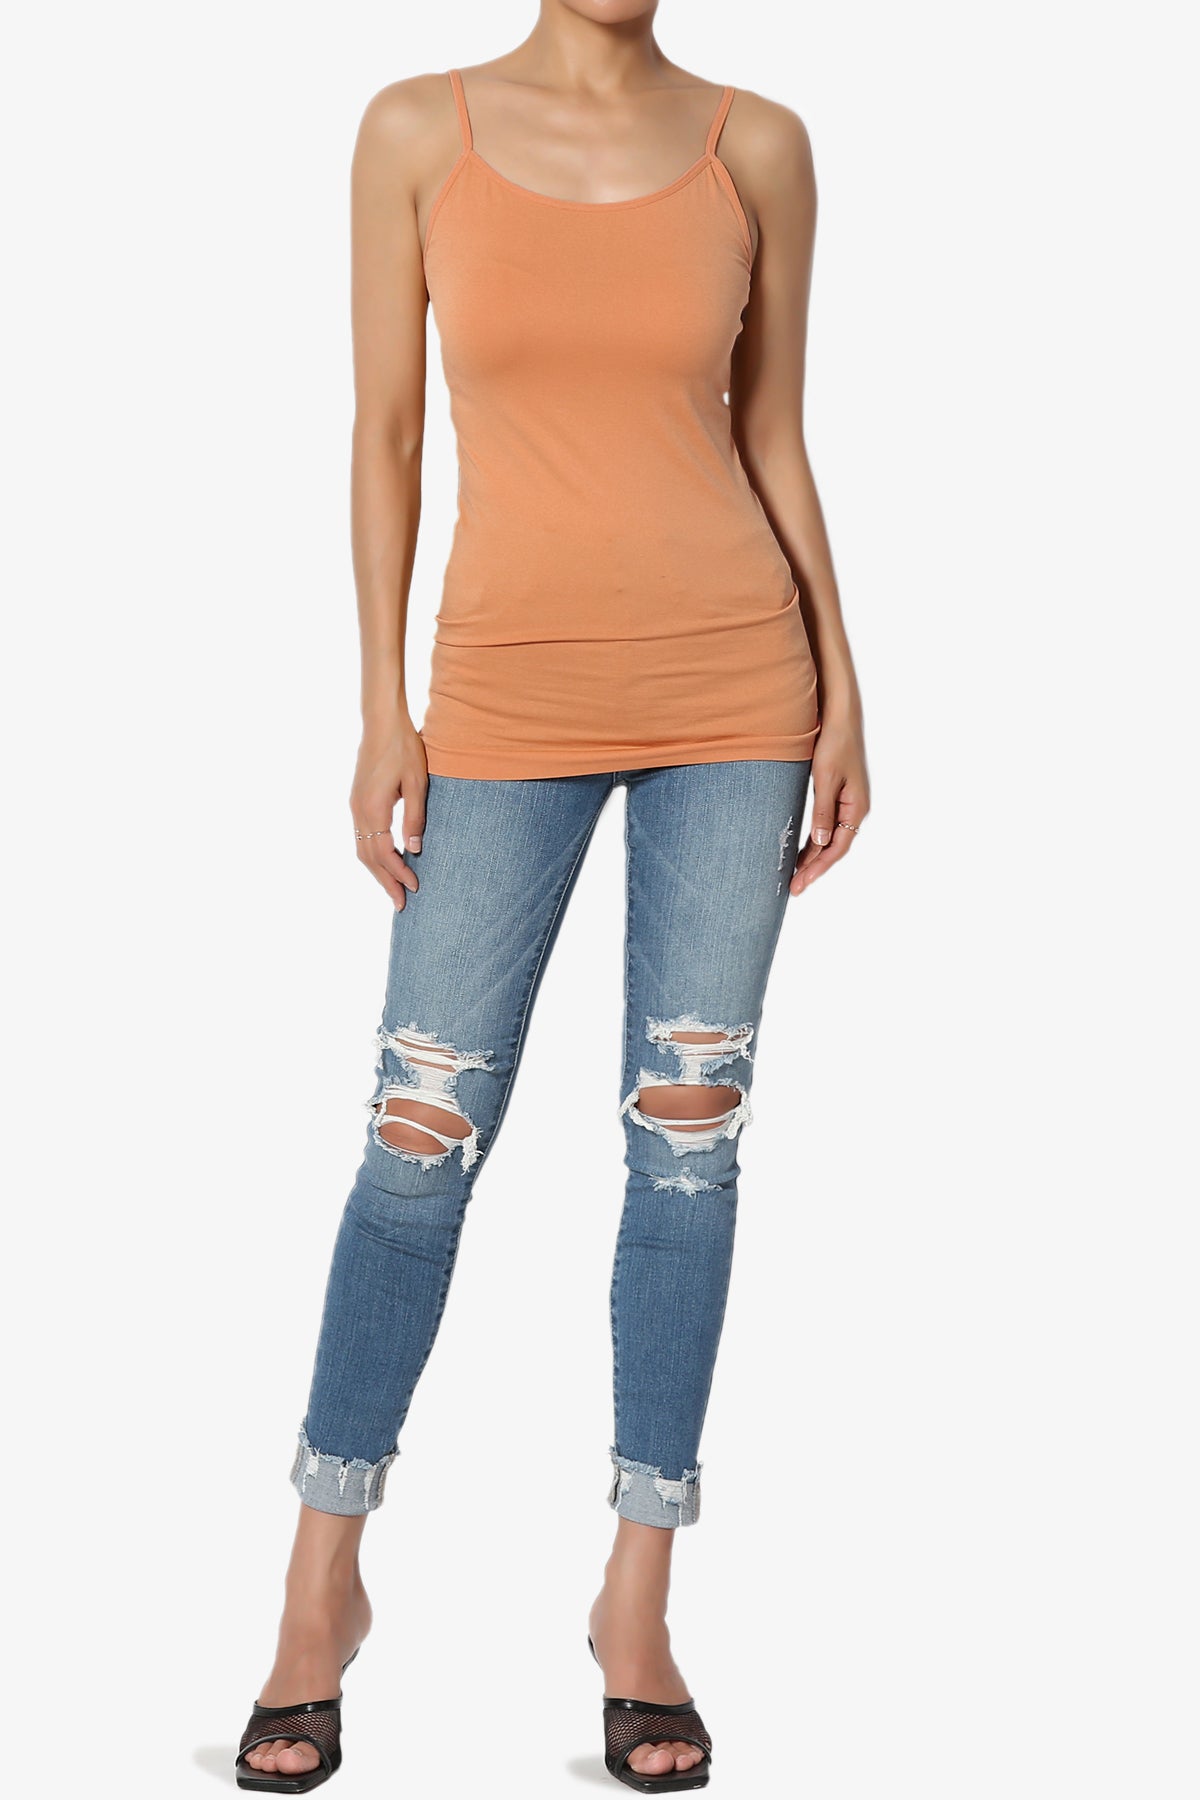 Load image into Gallery viewer, Himari Seamless Camisole Top BUTTER ORANGE_6
